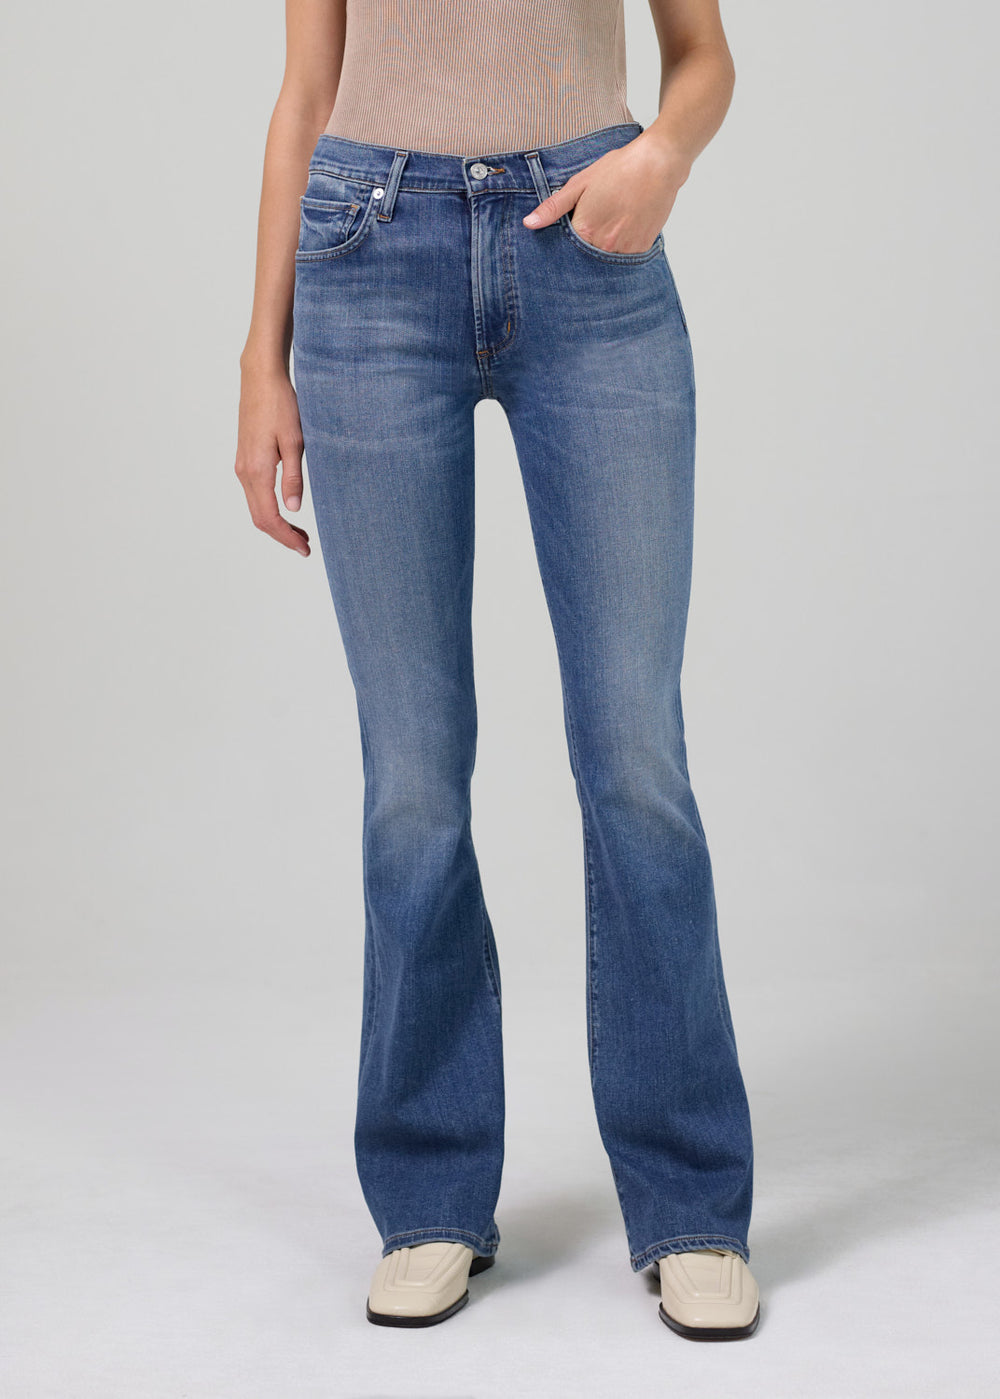 Mid- Rise Boot Cut Jeans - hezventures apparel